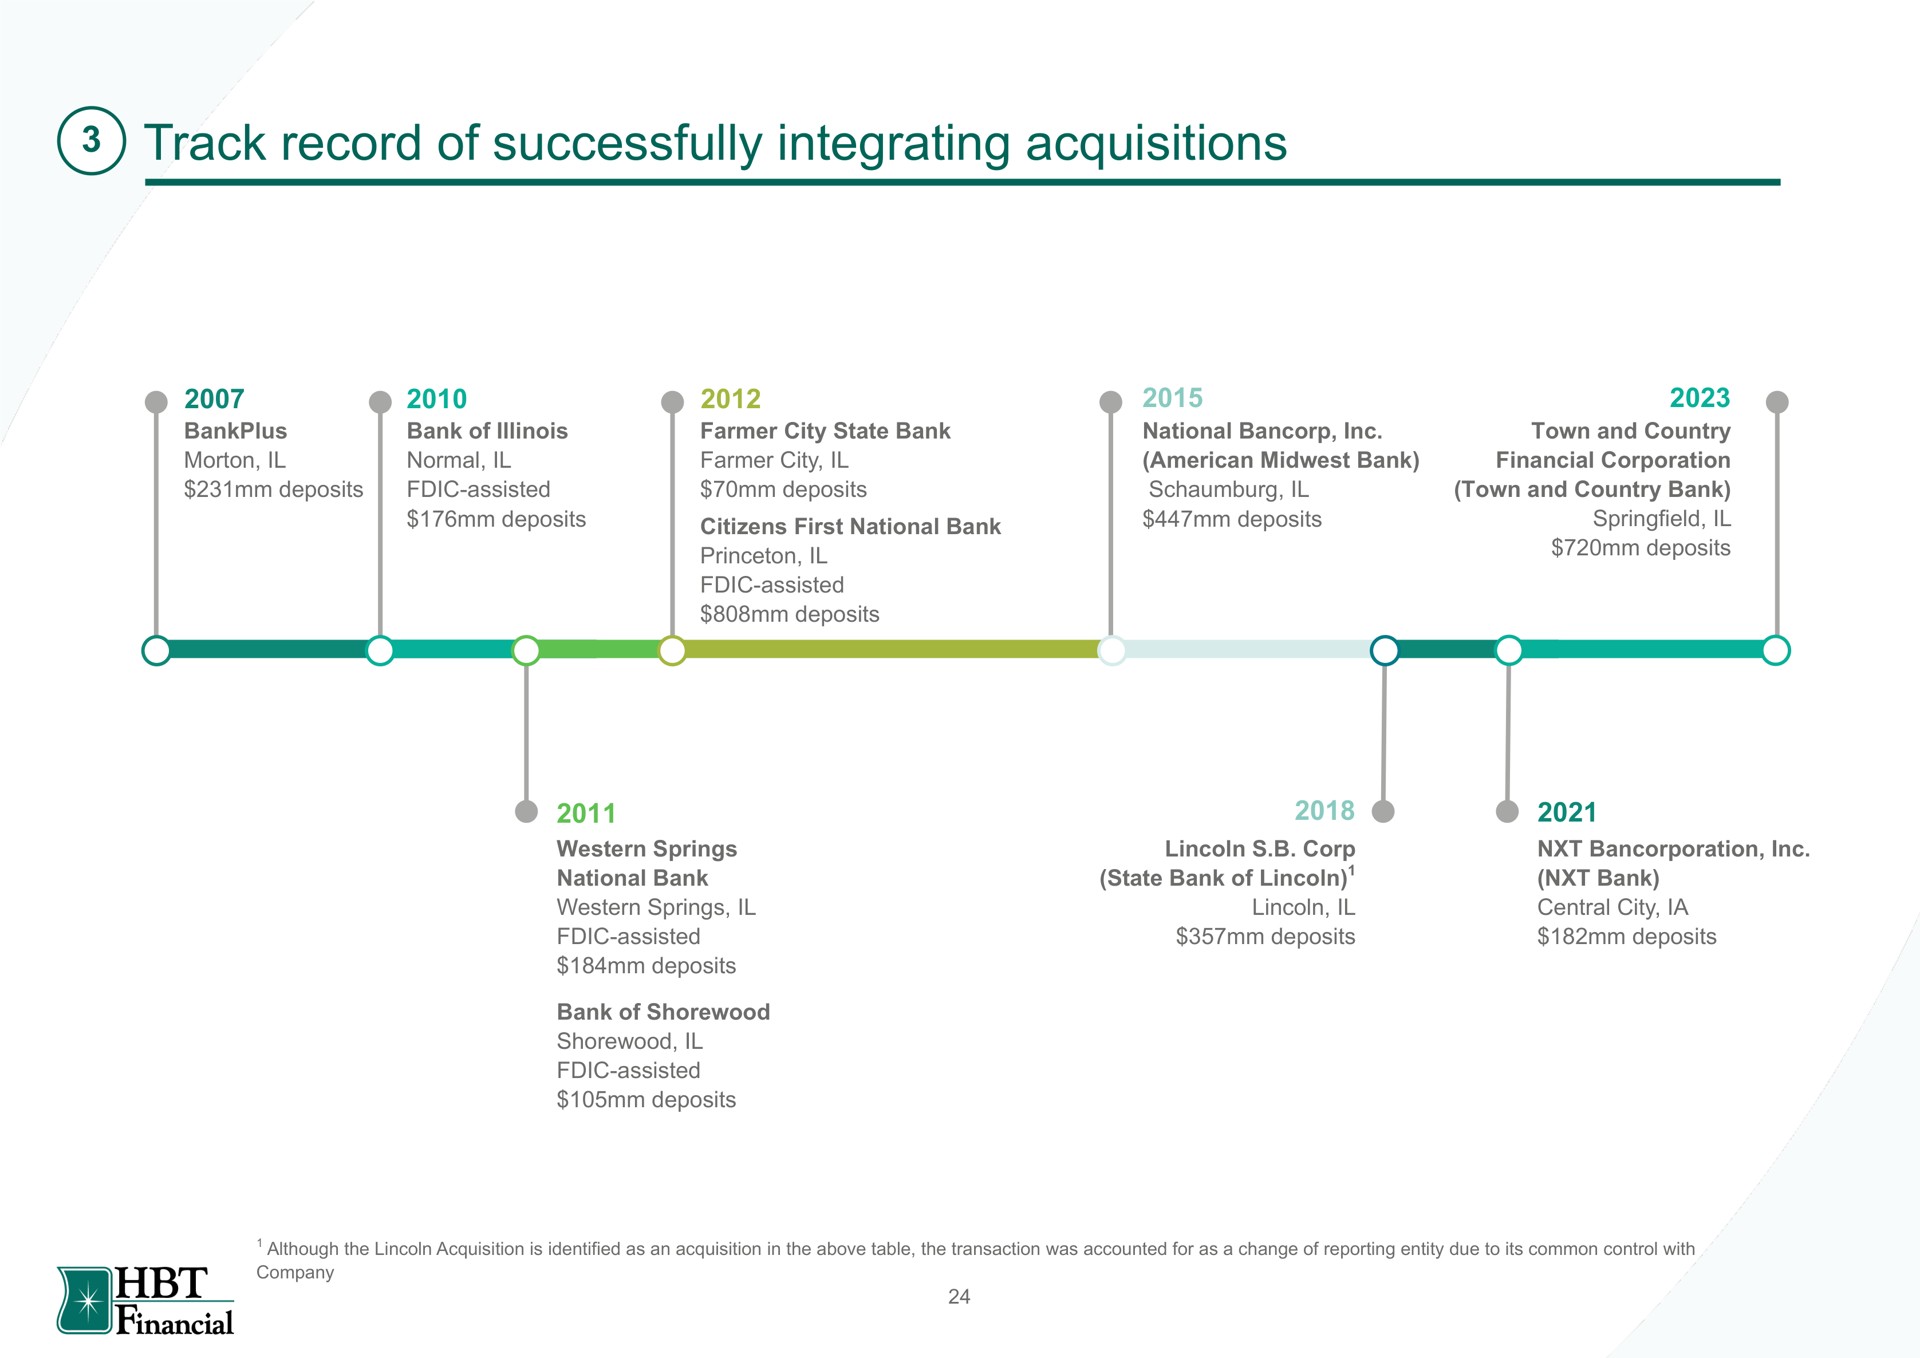 track record of successfully integrating acquisitions | HBT Financial